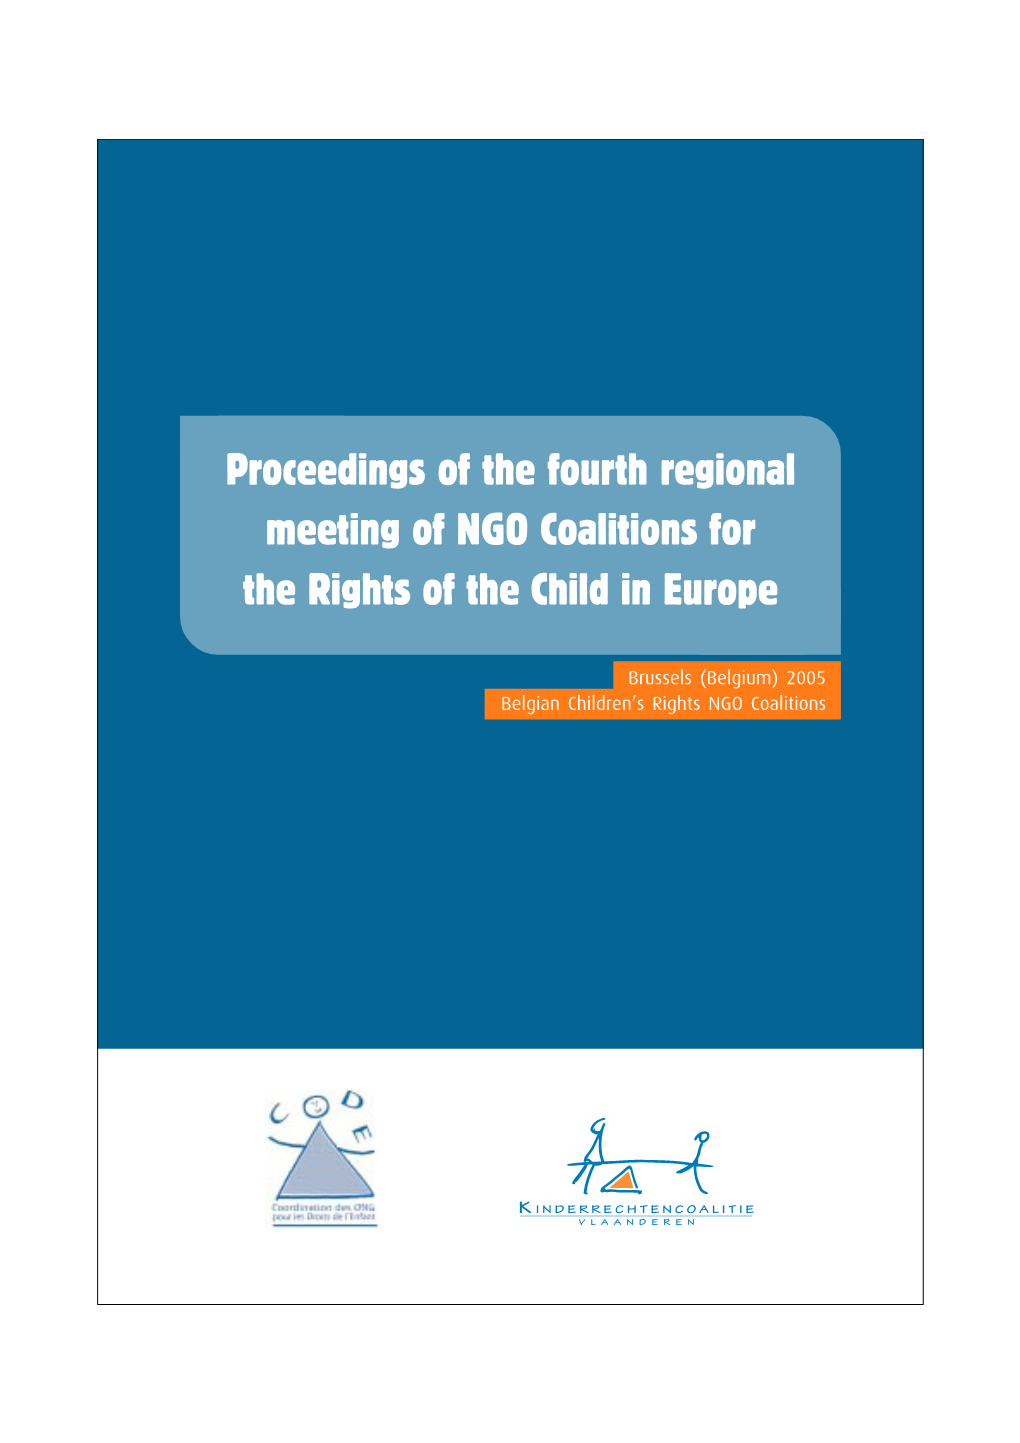 Proceedings of the Fourth Regional Meeting of NGO Coalitions for the Rights of the Child in Europe